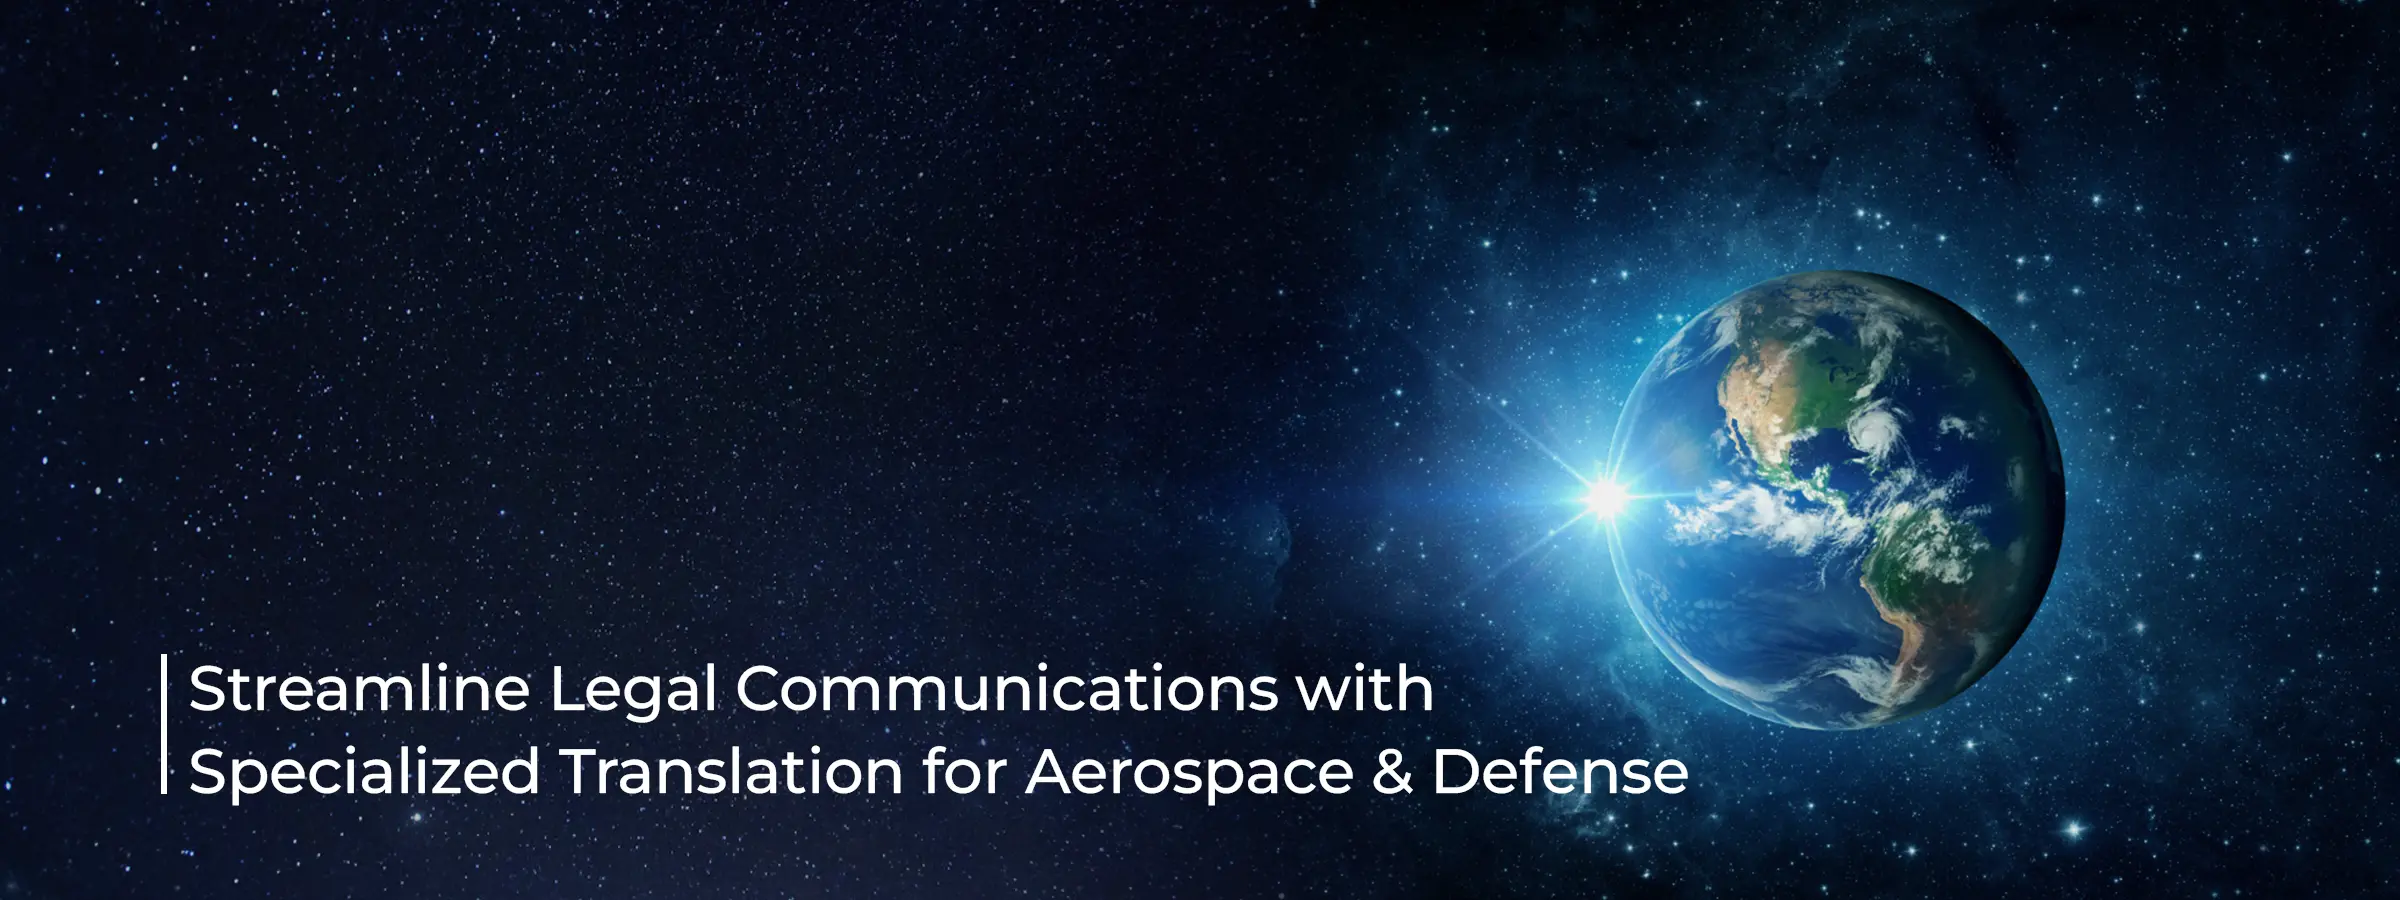 streamline-legal-communications-with-specialized-translation-for-aerospace-defense